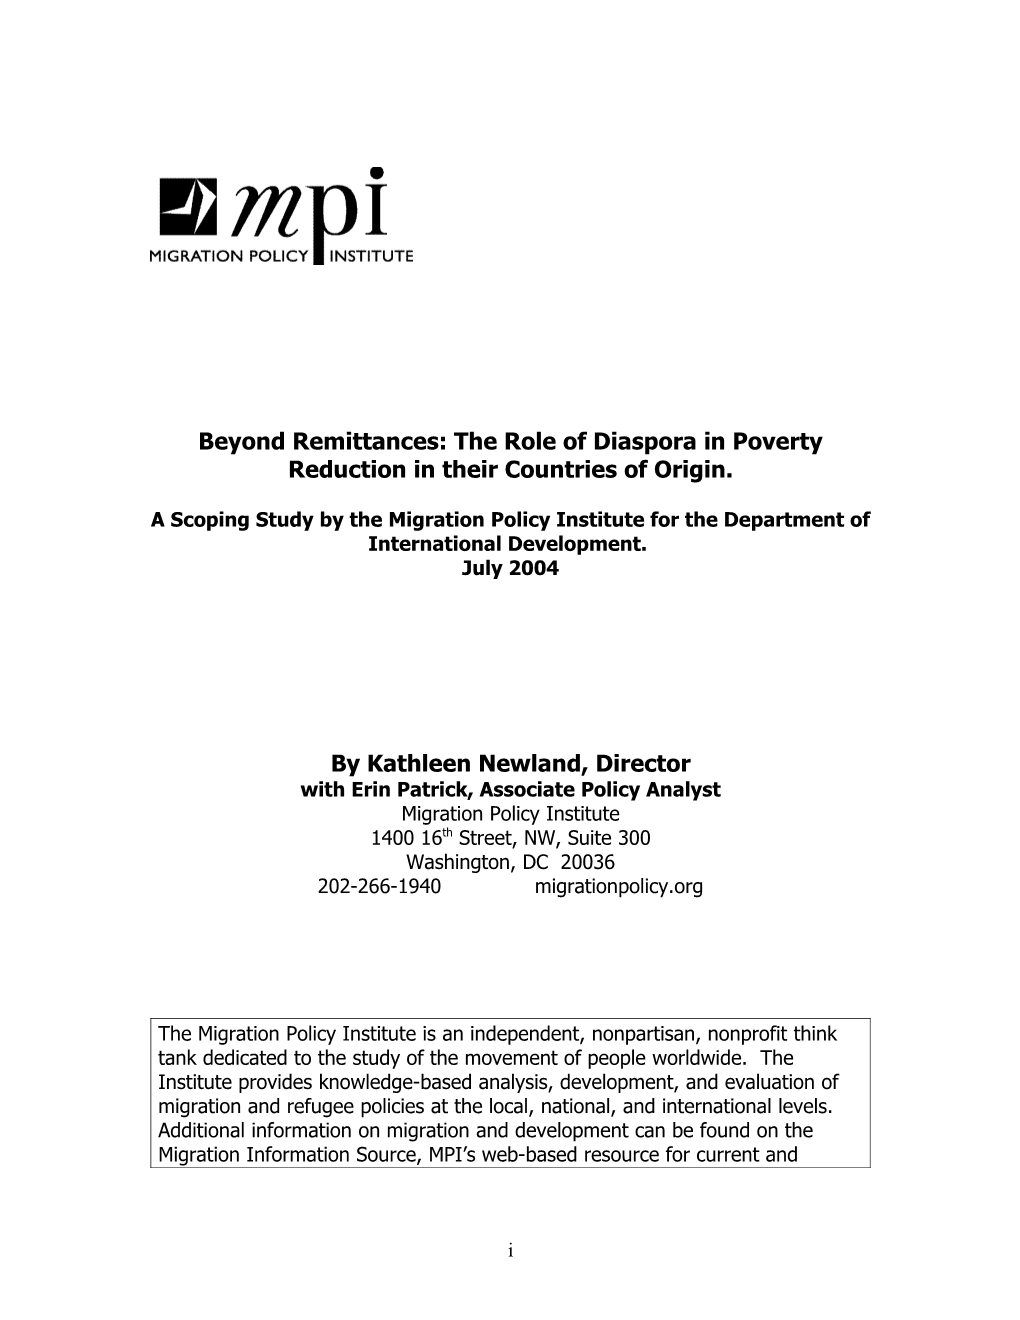 Away but Not Apart: the Role of Diaspora in Poverty Reduction in Their Countries of Origin